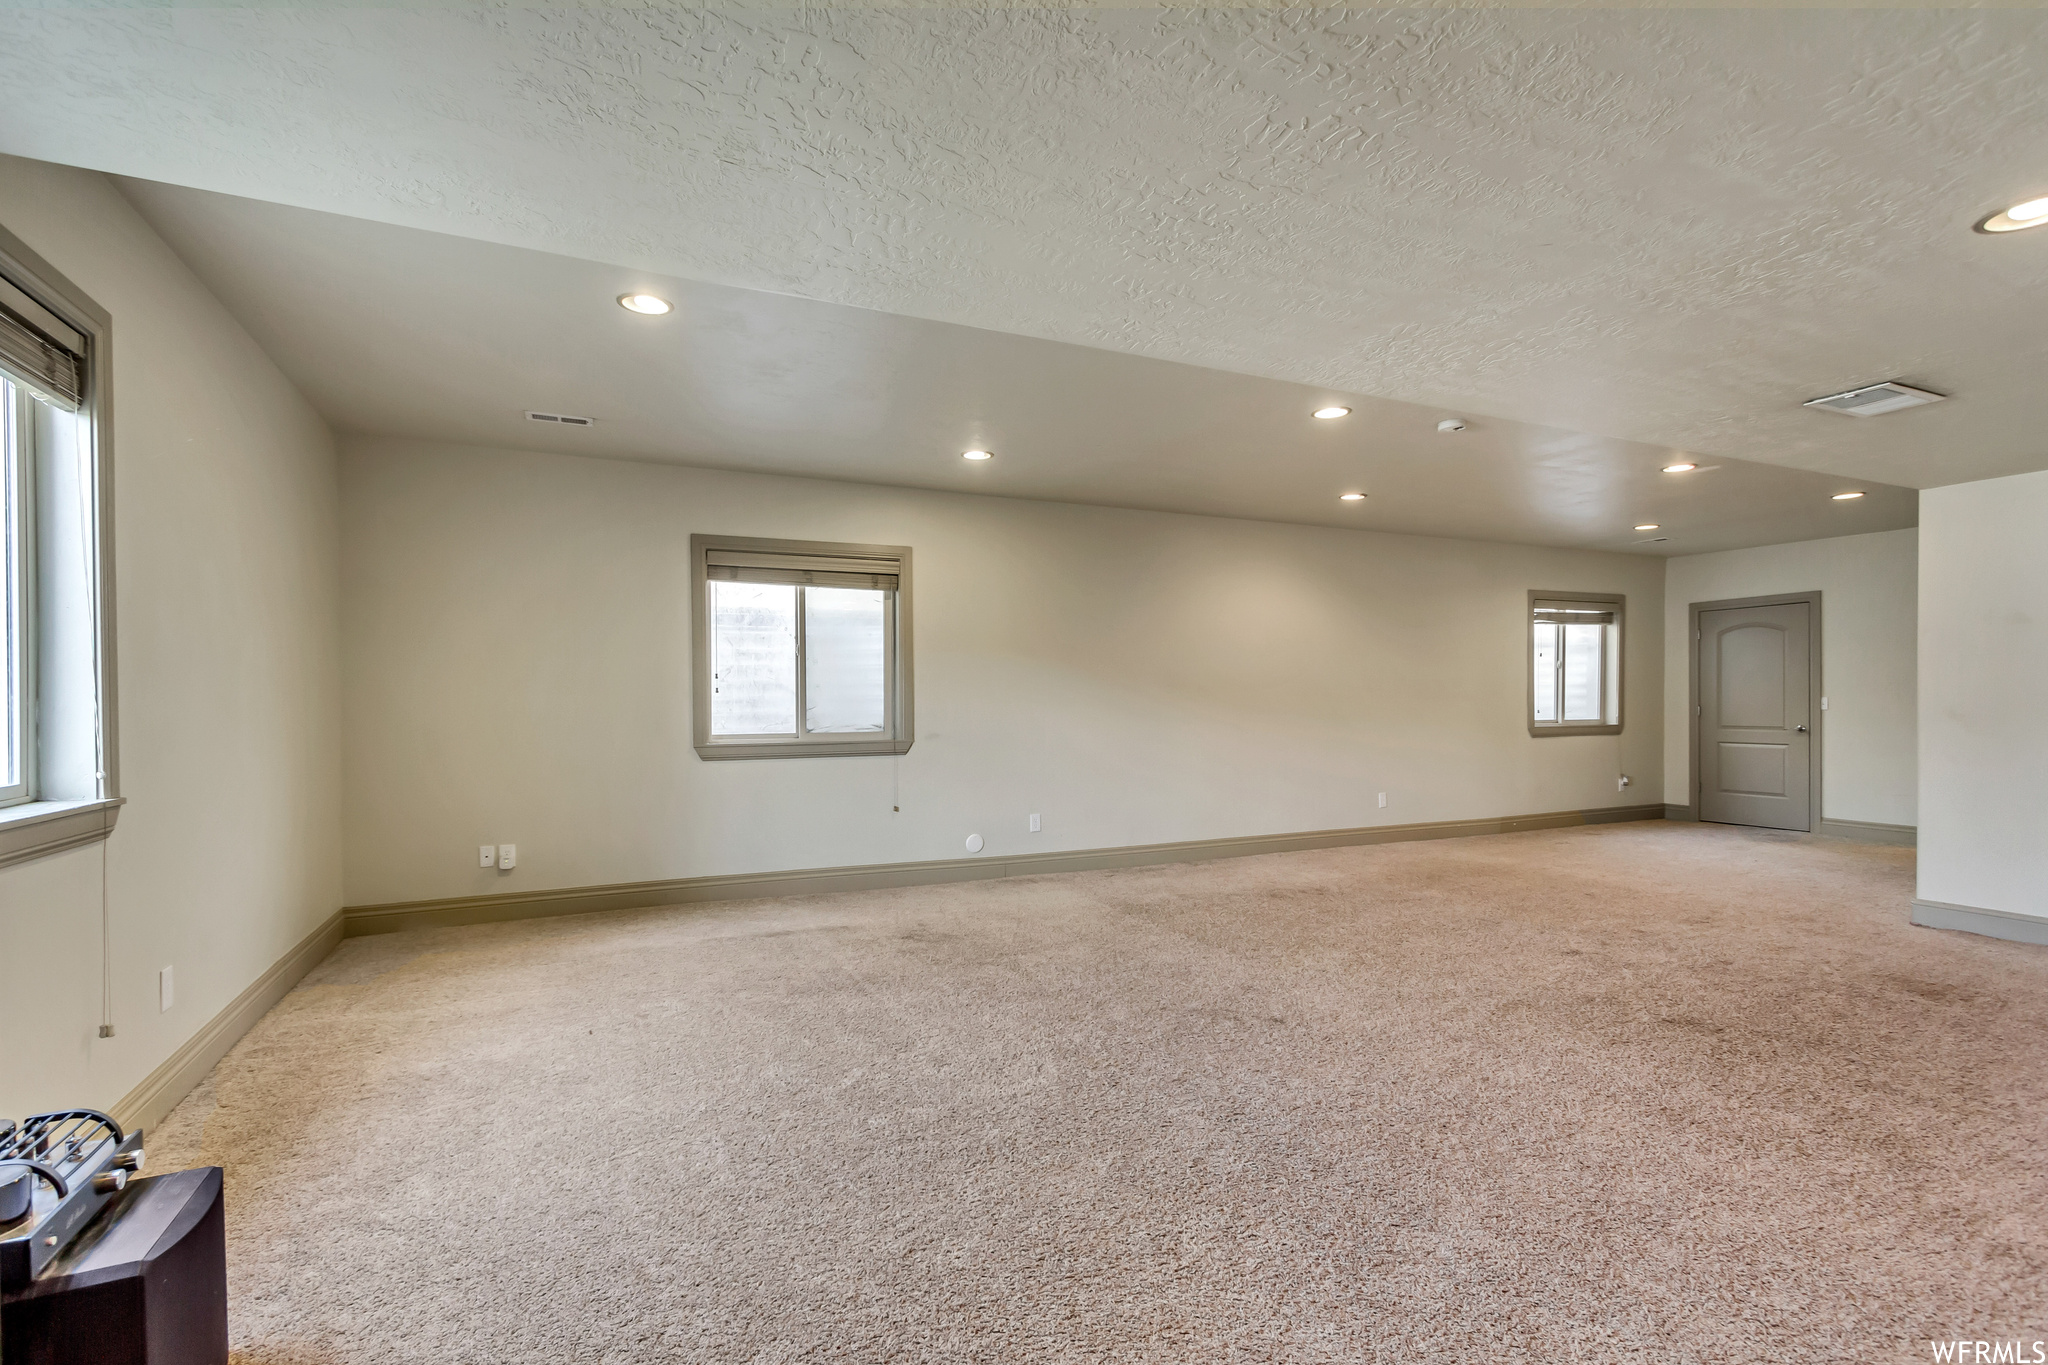 Unfurnished room with plenty of natural light, light colored carpet, and a textured ceiling